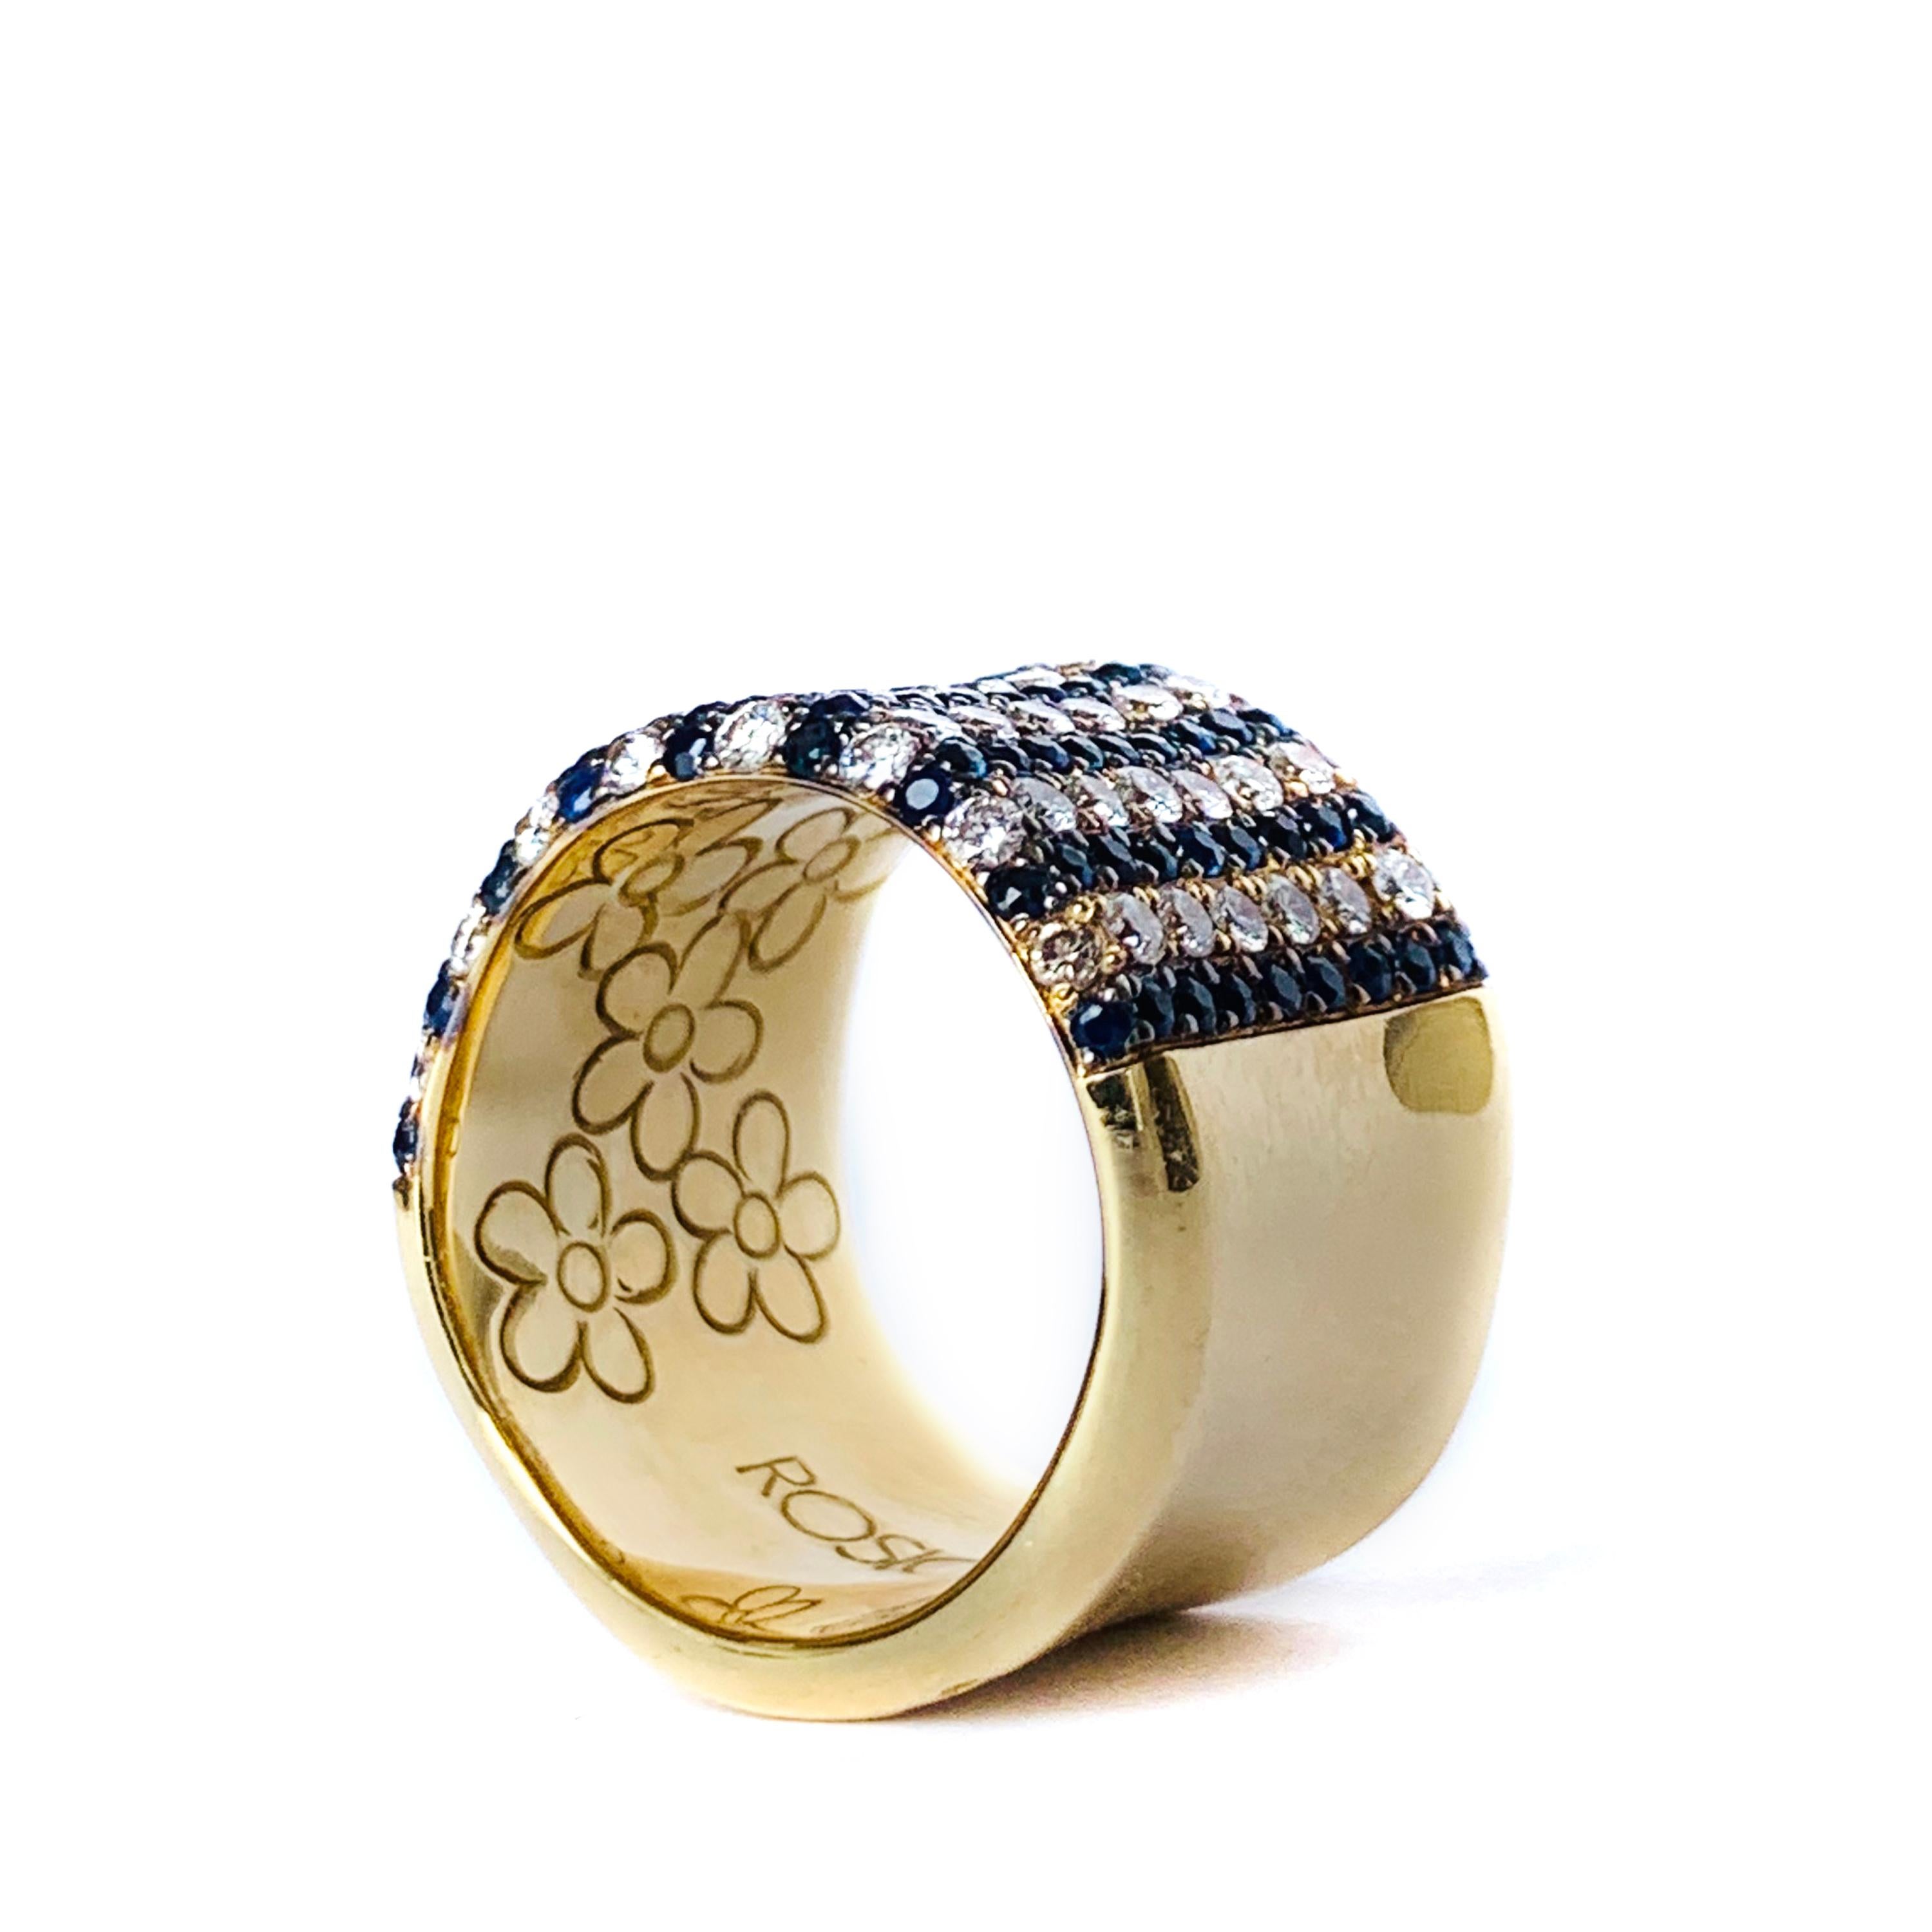 Contemporary Round Cut Diamond and Sapphire Ring in 19.2 Karat Yellow Gold 2